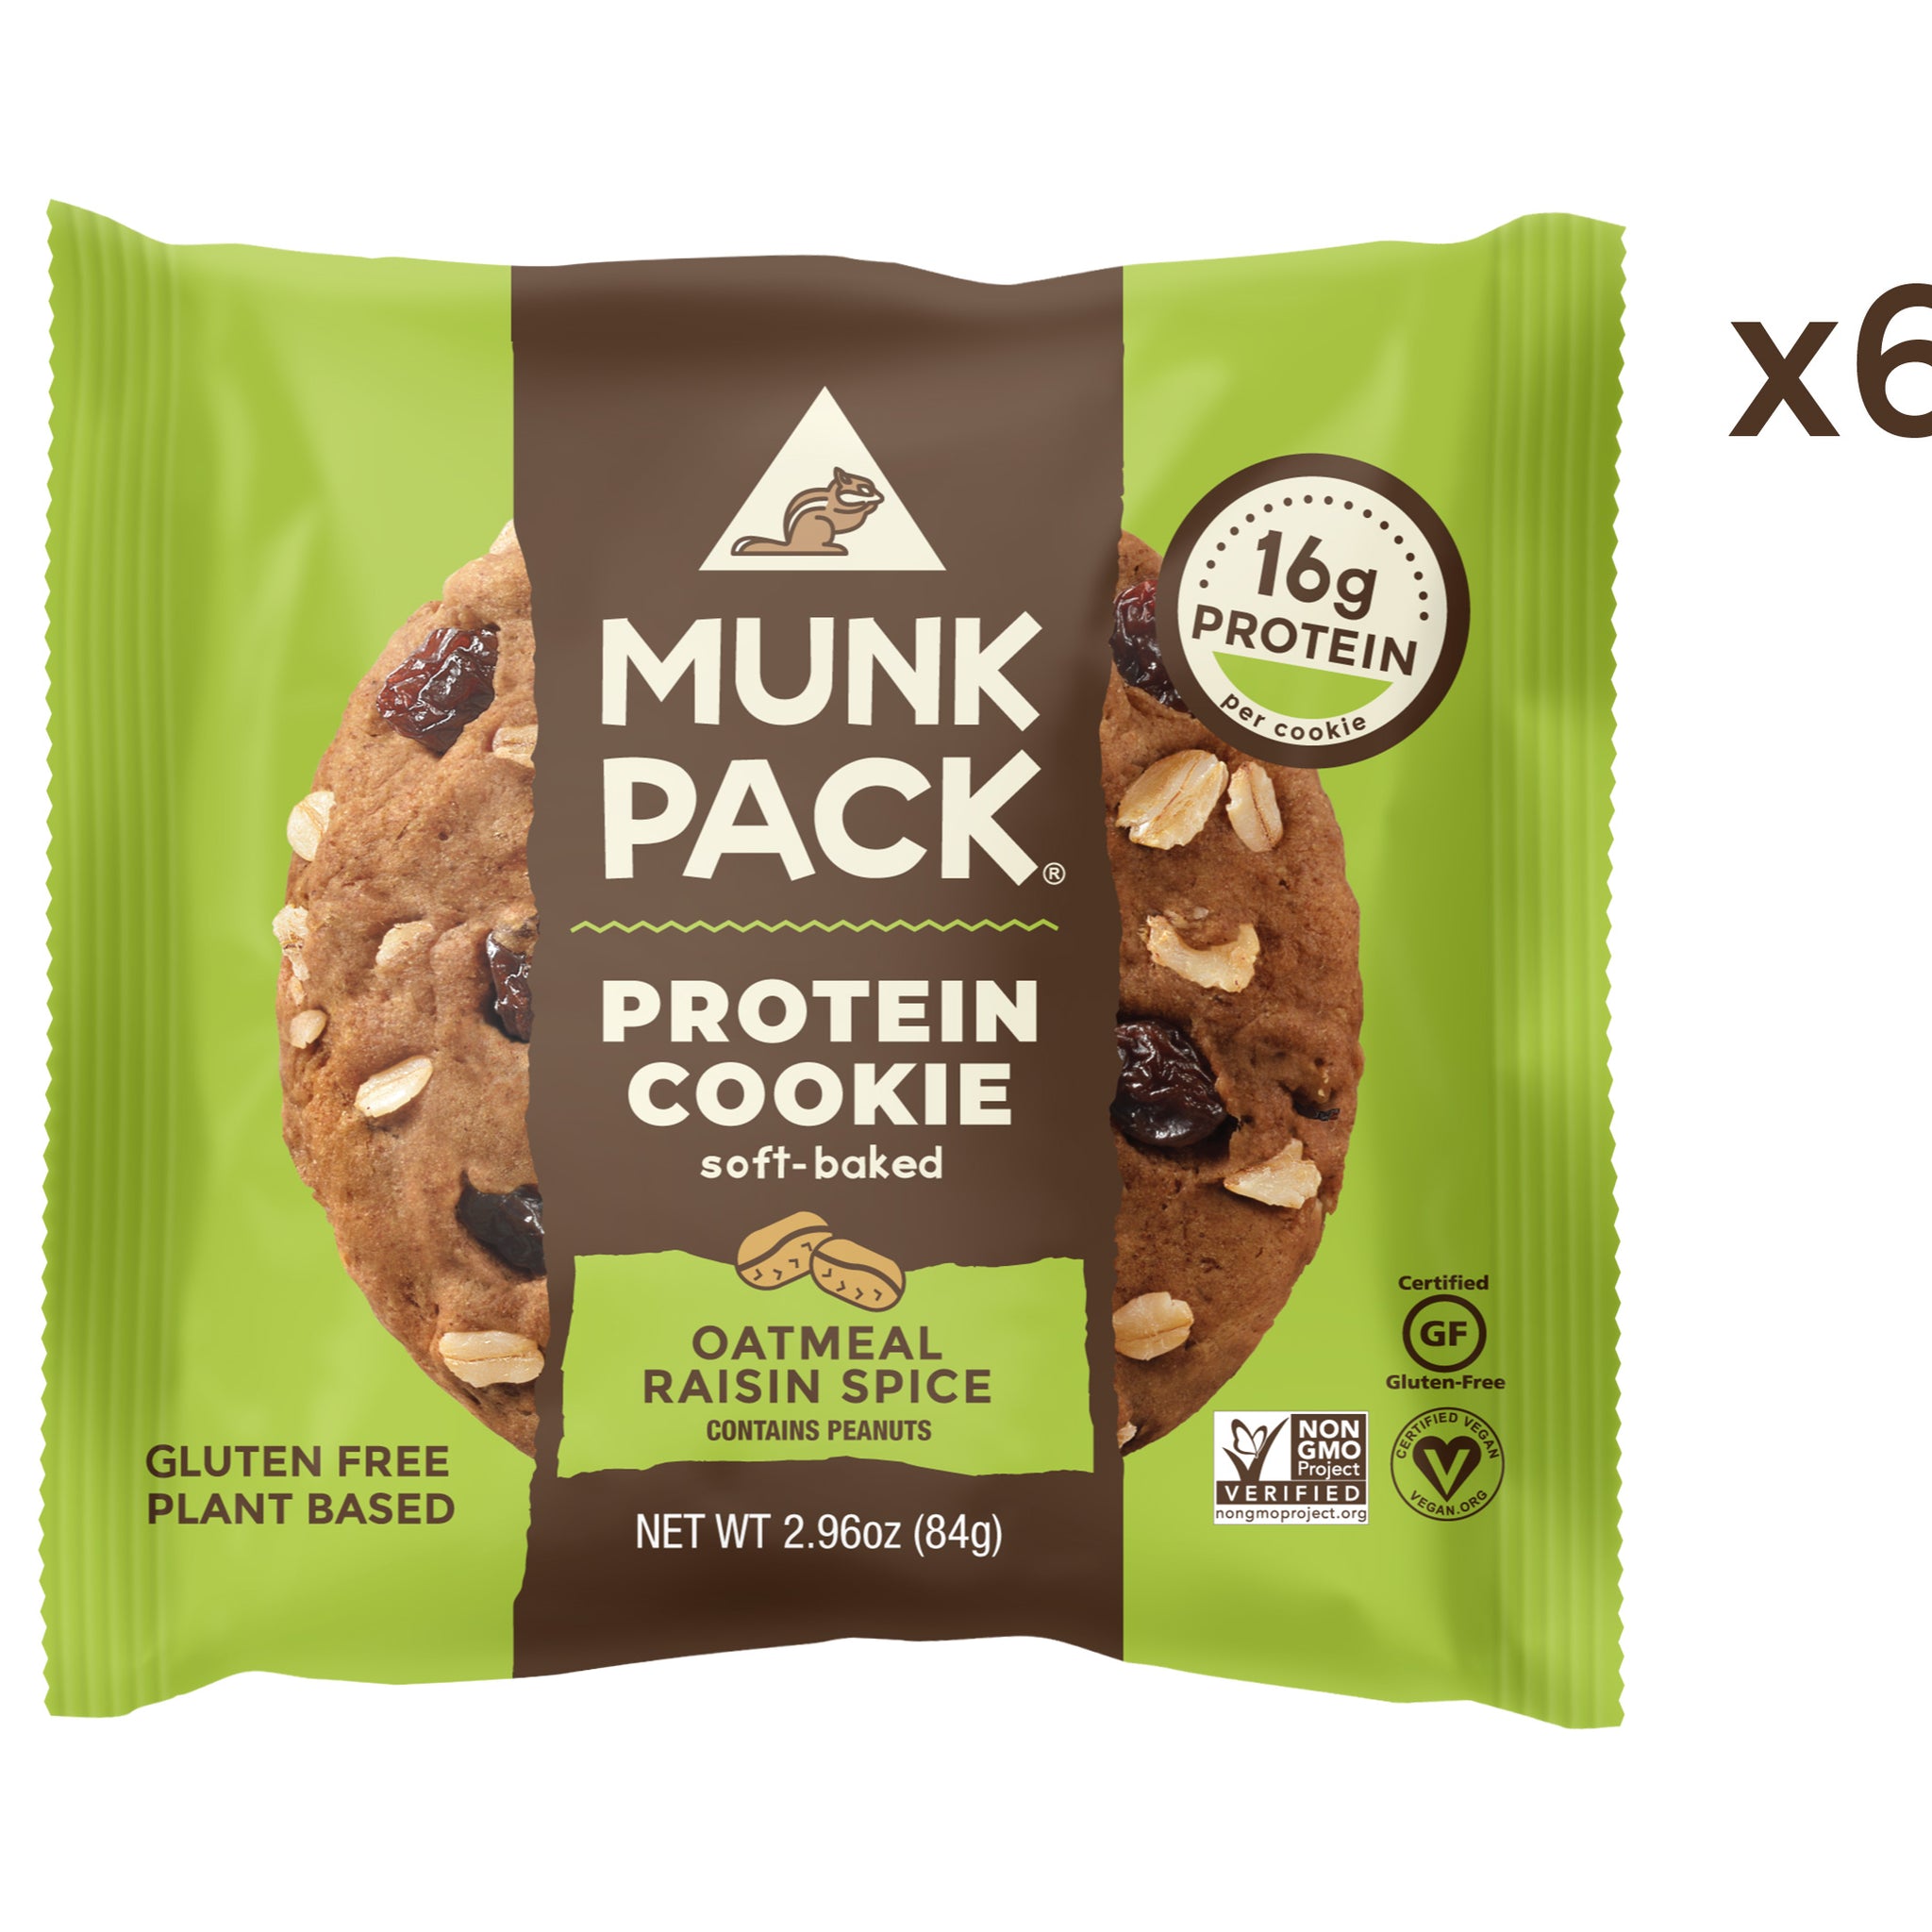 Munk Pack Gluten-Free Oatmeal Raisin Spice Cookies, 6 Count